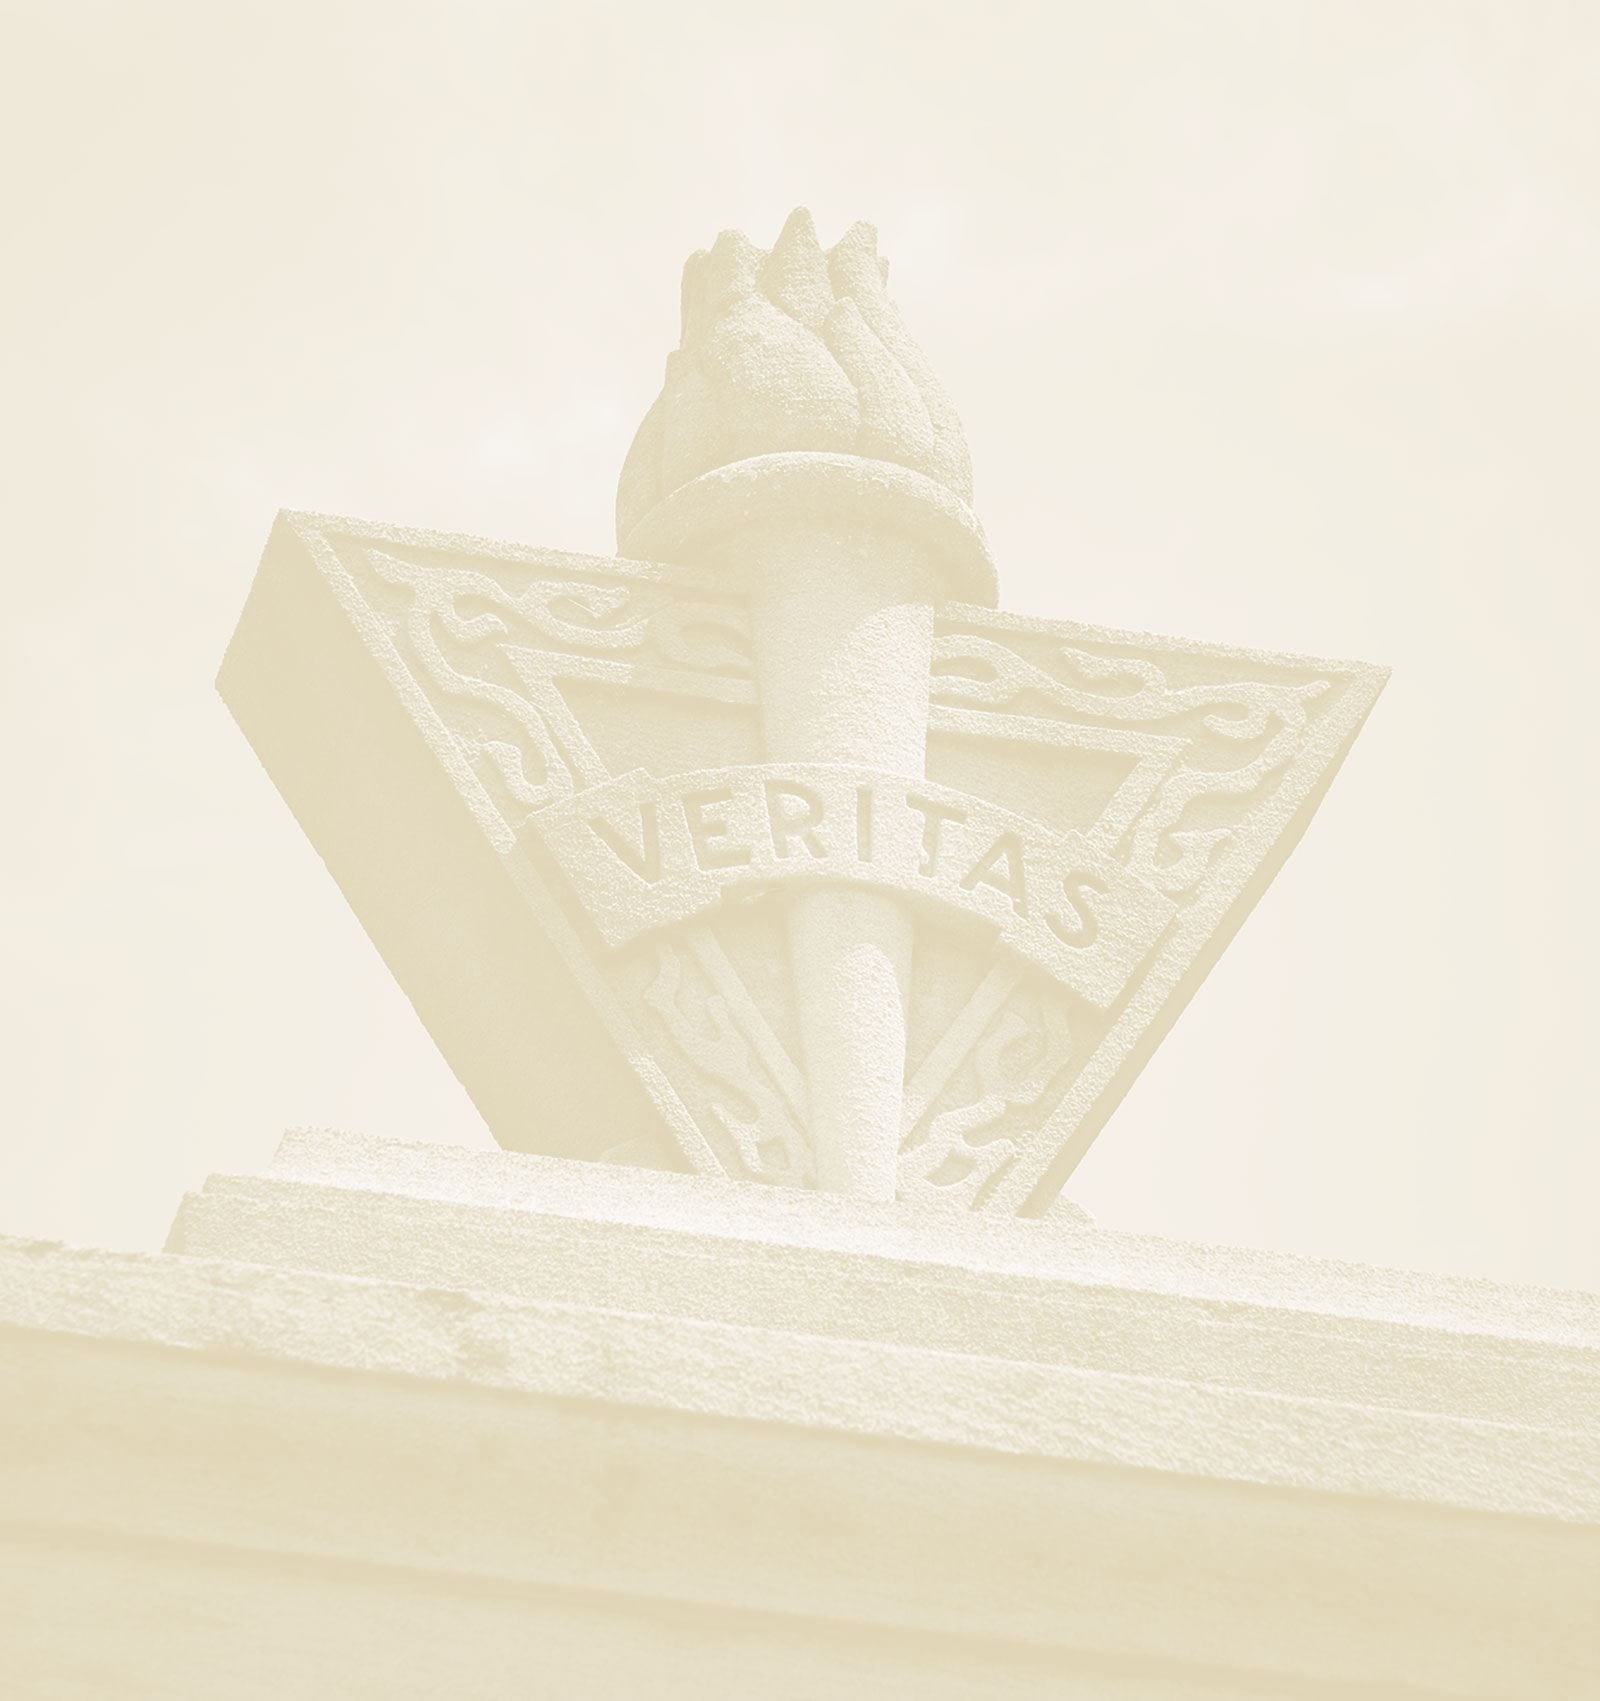 The torch and veritas logo of Providence College